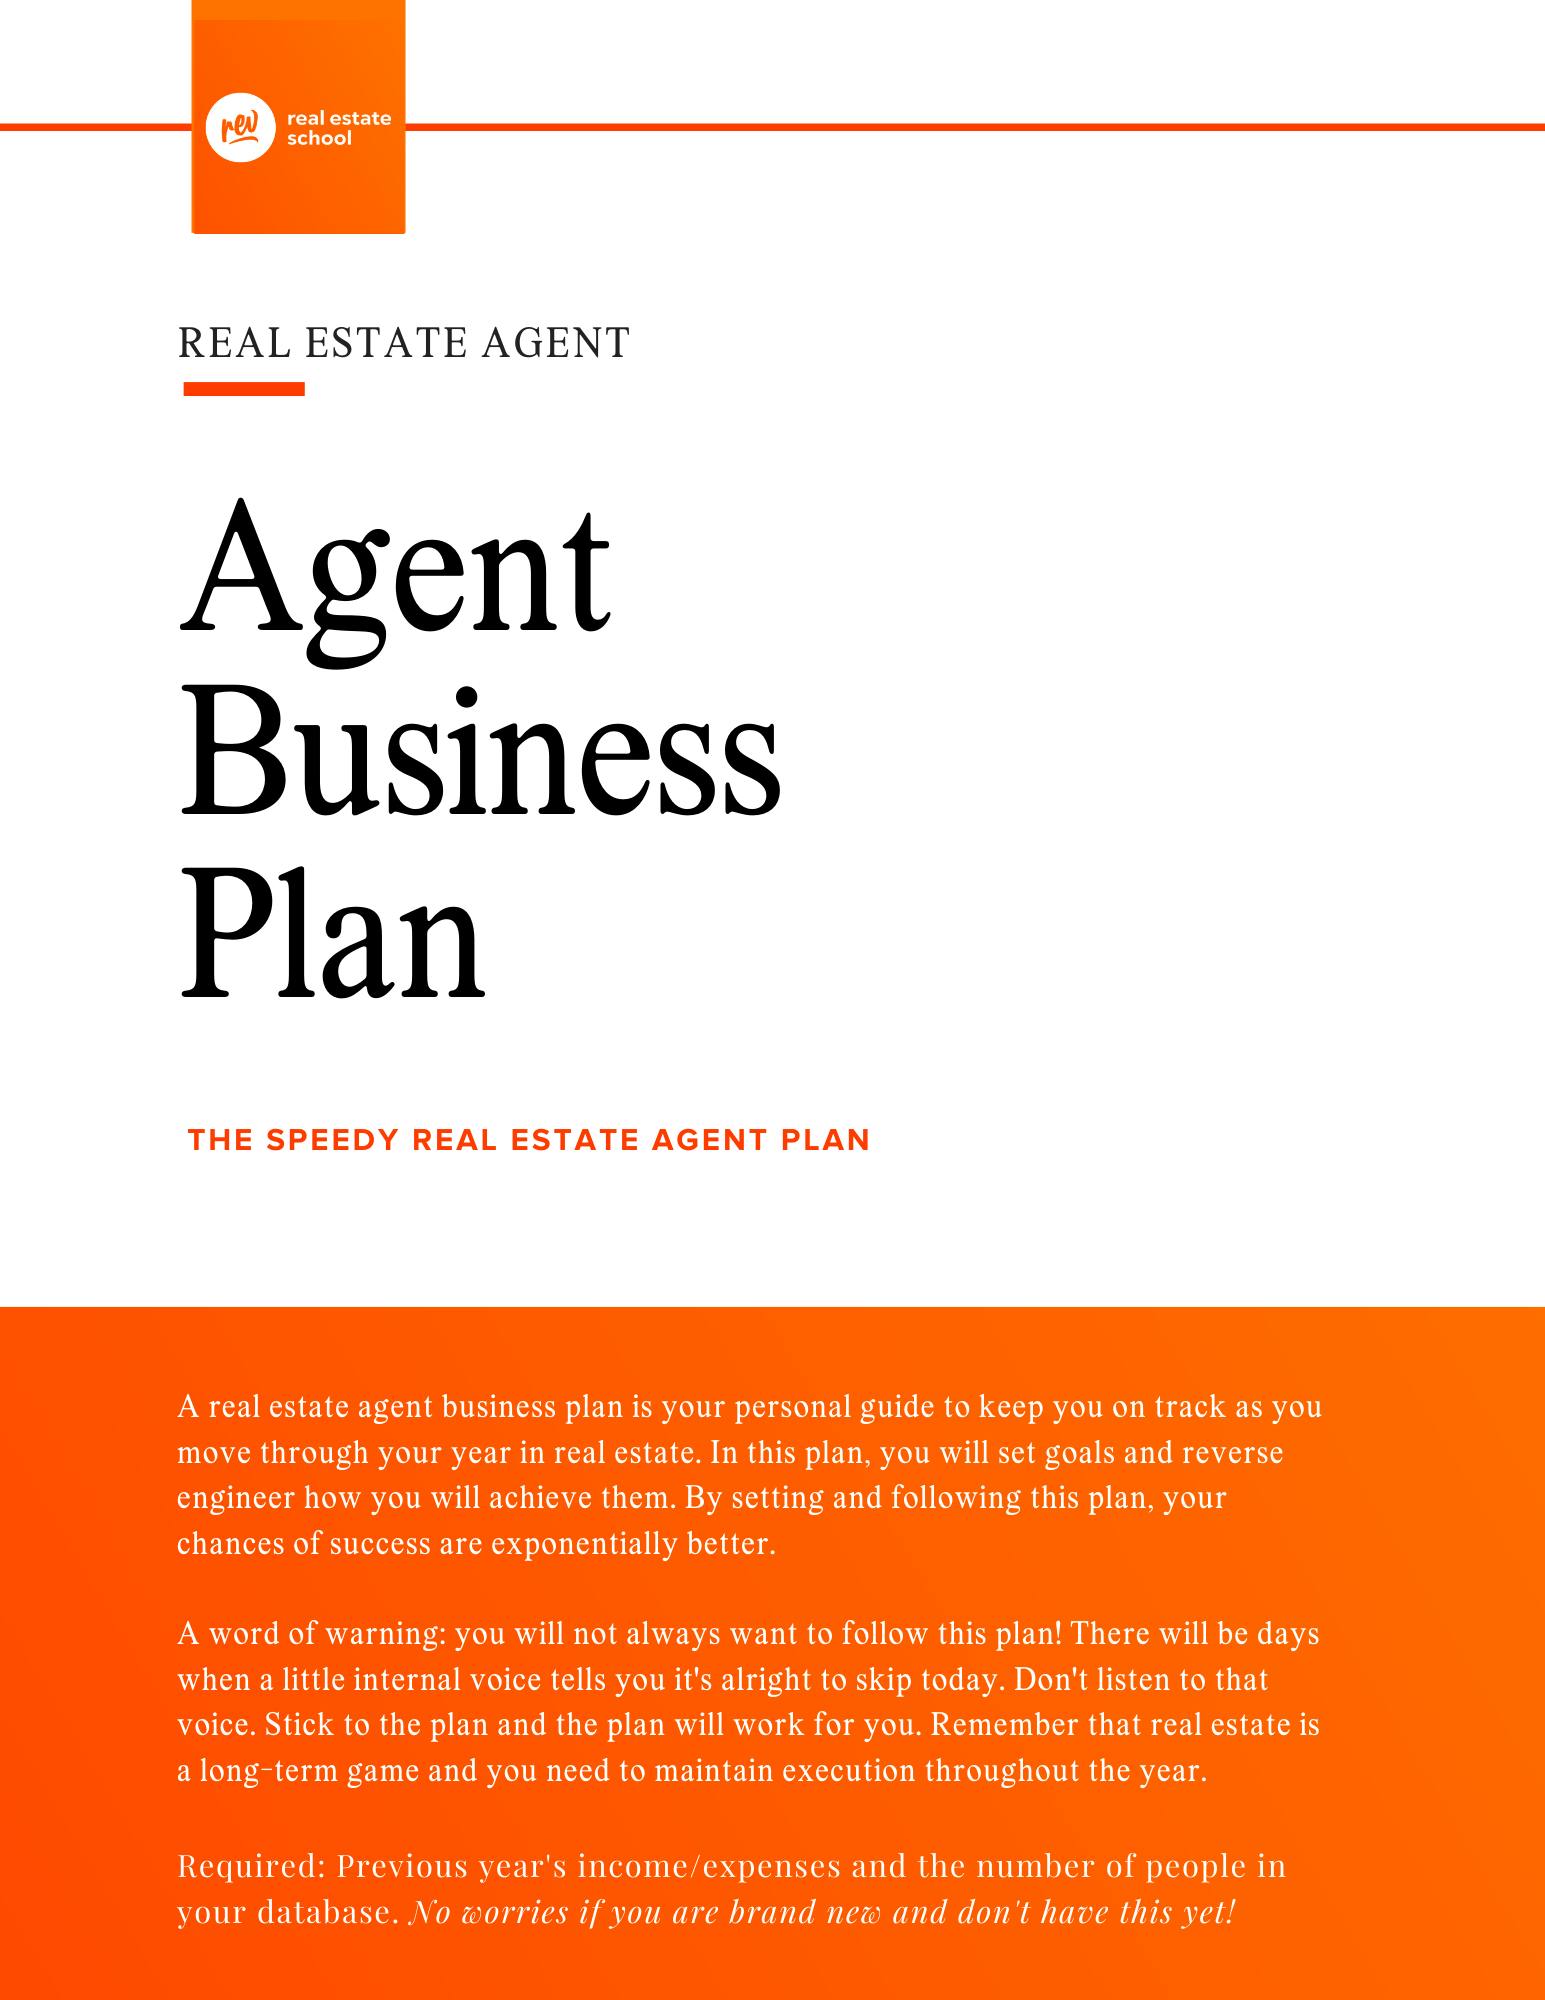 How to Write a Real Estate Business Plan (+ Free Template)